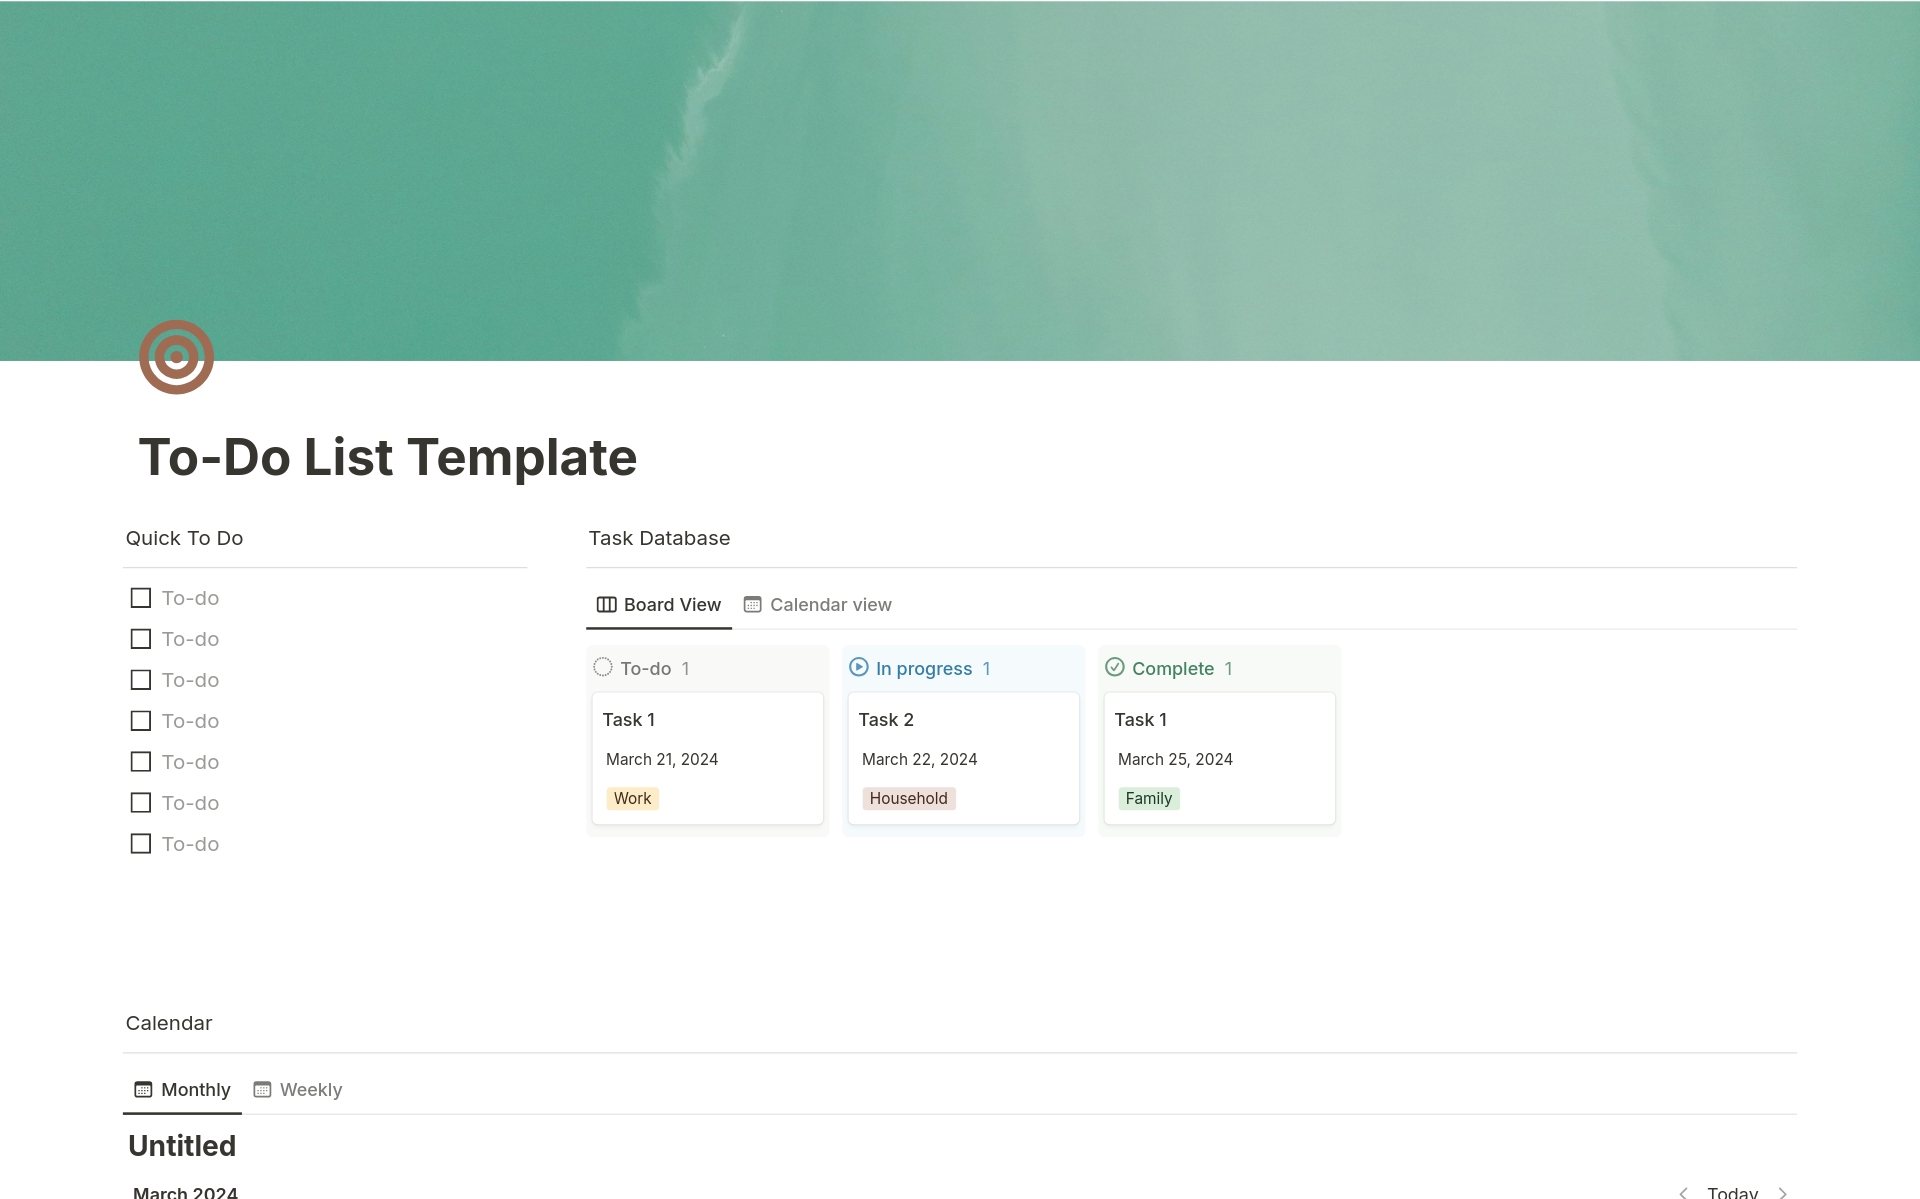 Easy To Do List Template with Organize Daily Life without Hassle.

Manage day-to-day life In this template and manage all things with more productivity.